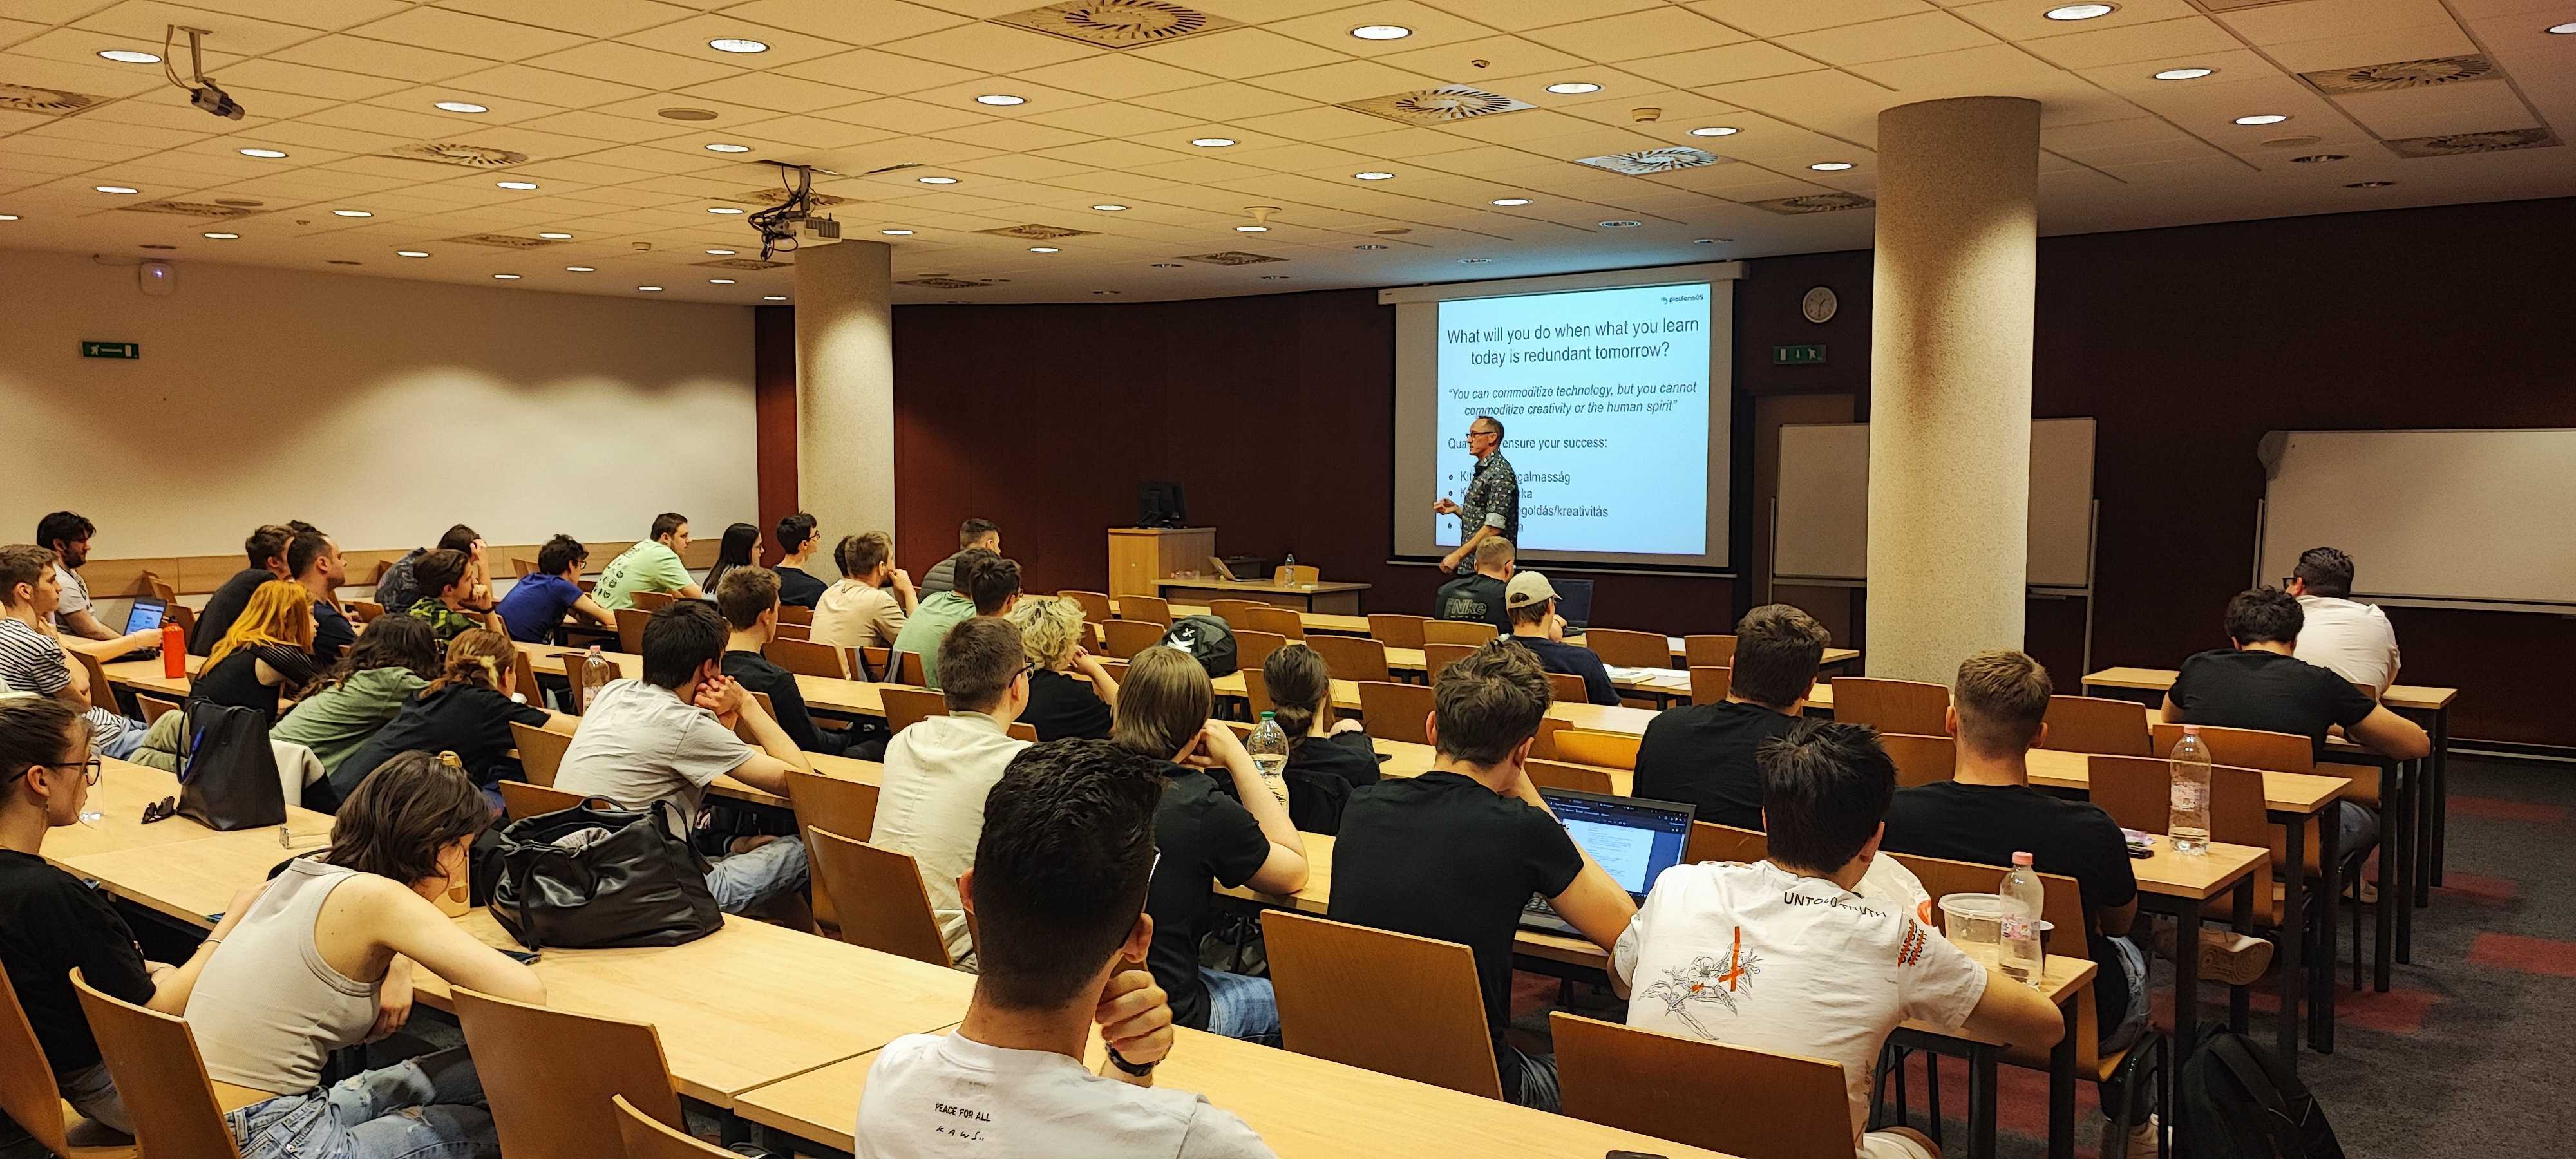 Adam Boadway holding a presentation in front of many students of the University of Szeged